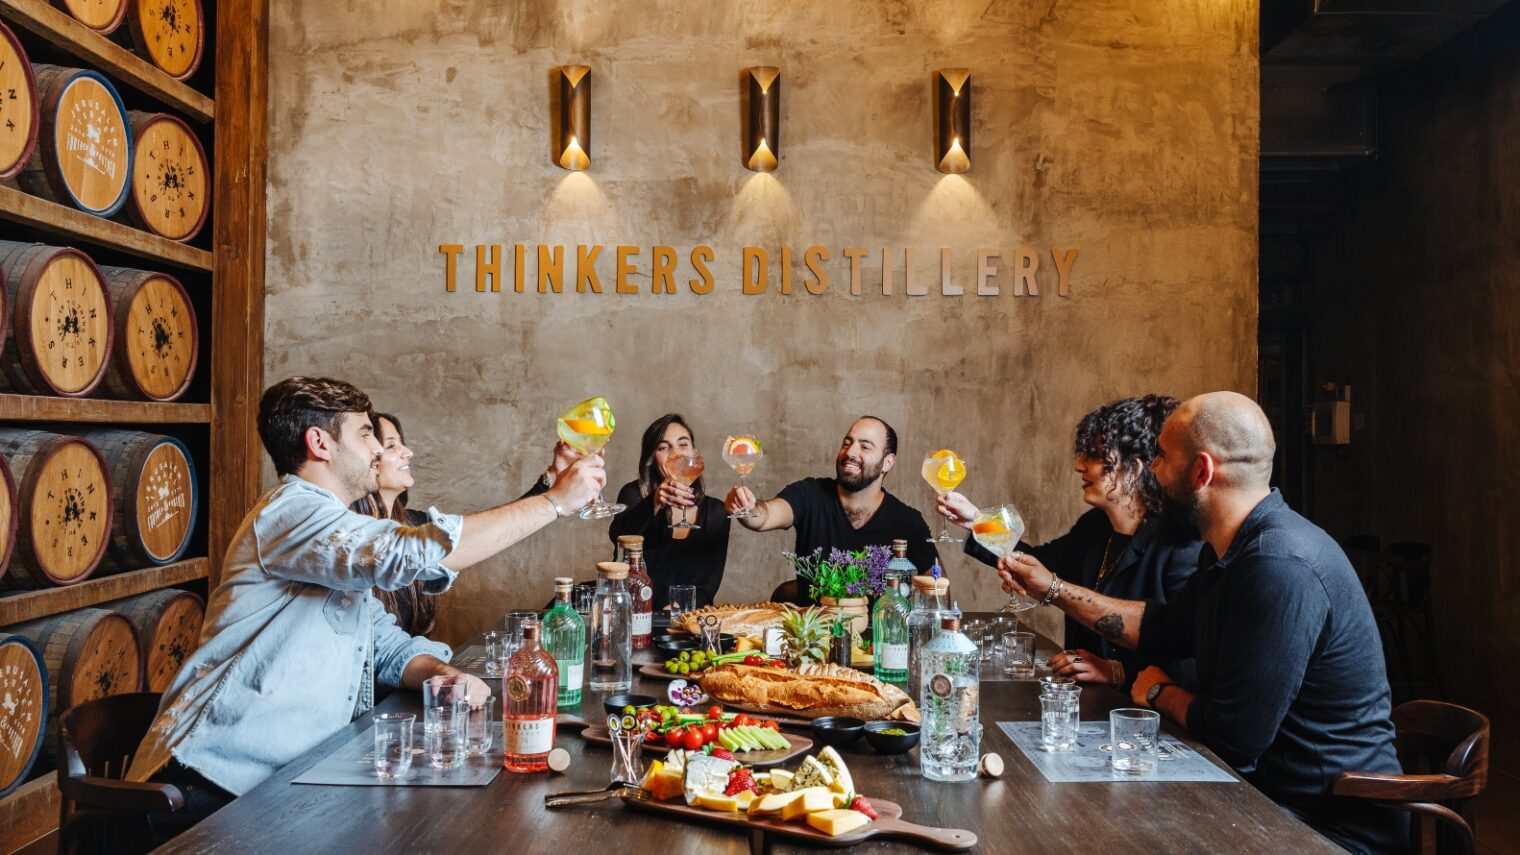 Visitors enjoying the spirits and the spirit at Thinkers Distillery in Jerusalem. Photo by Itamar Ginzburg